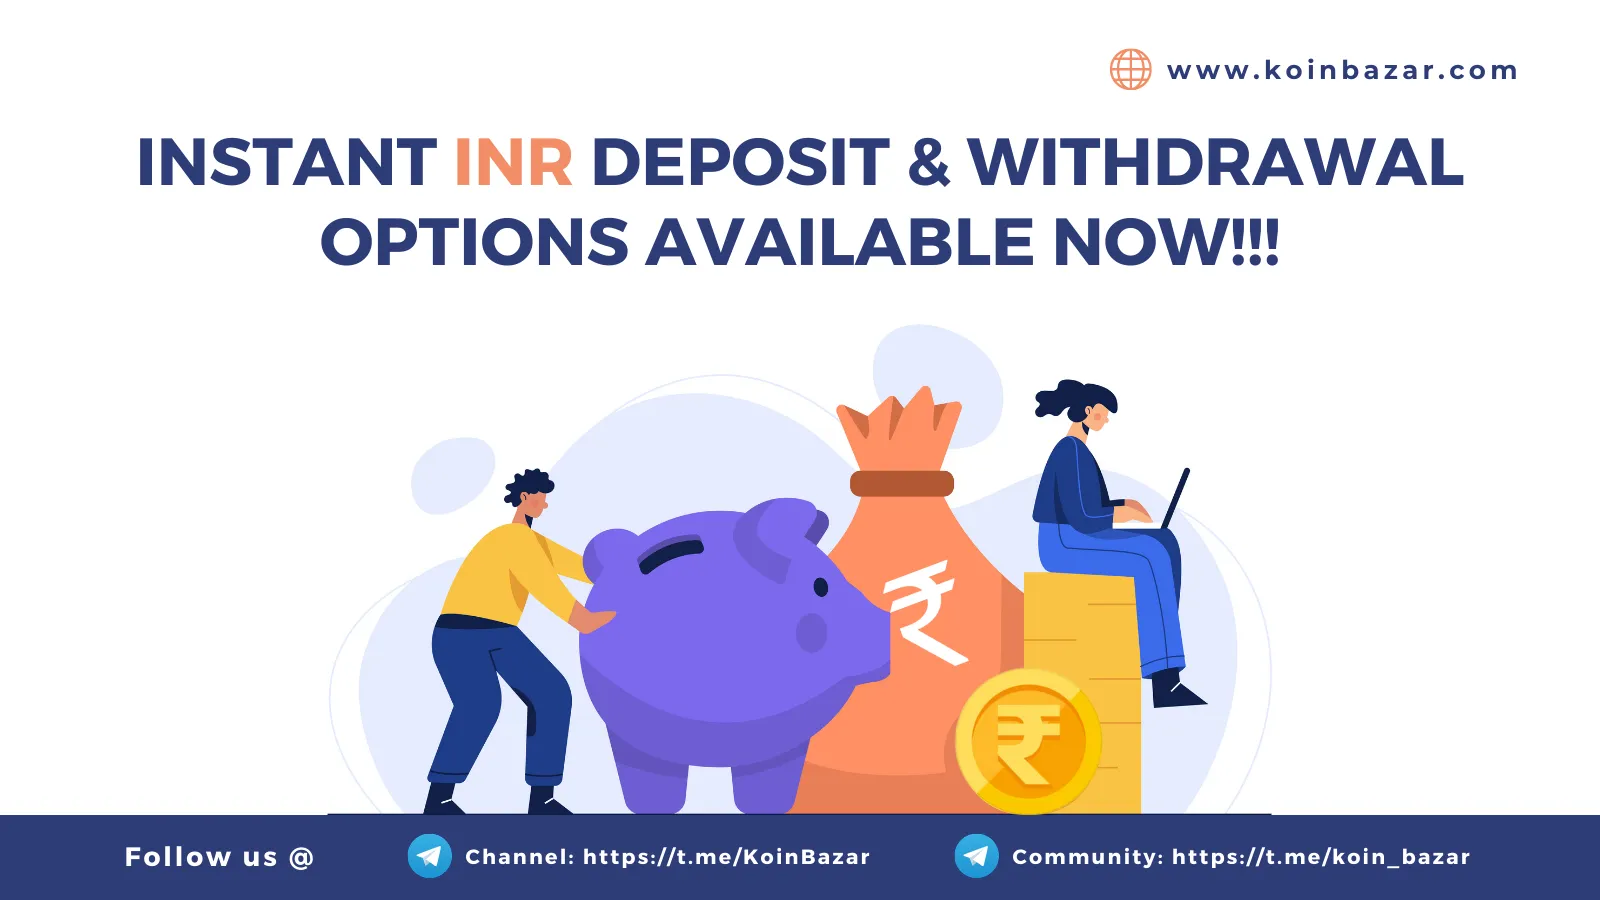 Koinbazar Launches Instant INR Deposit and Withdrawal 